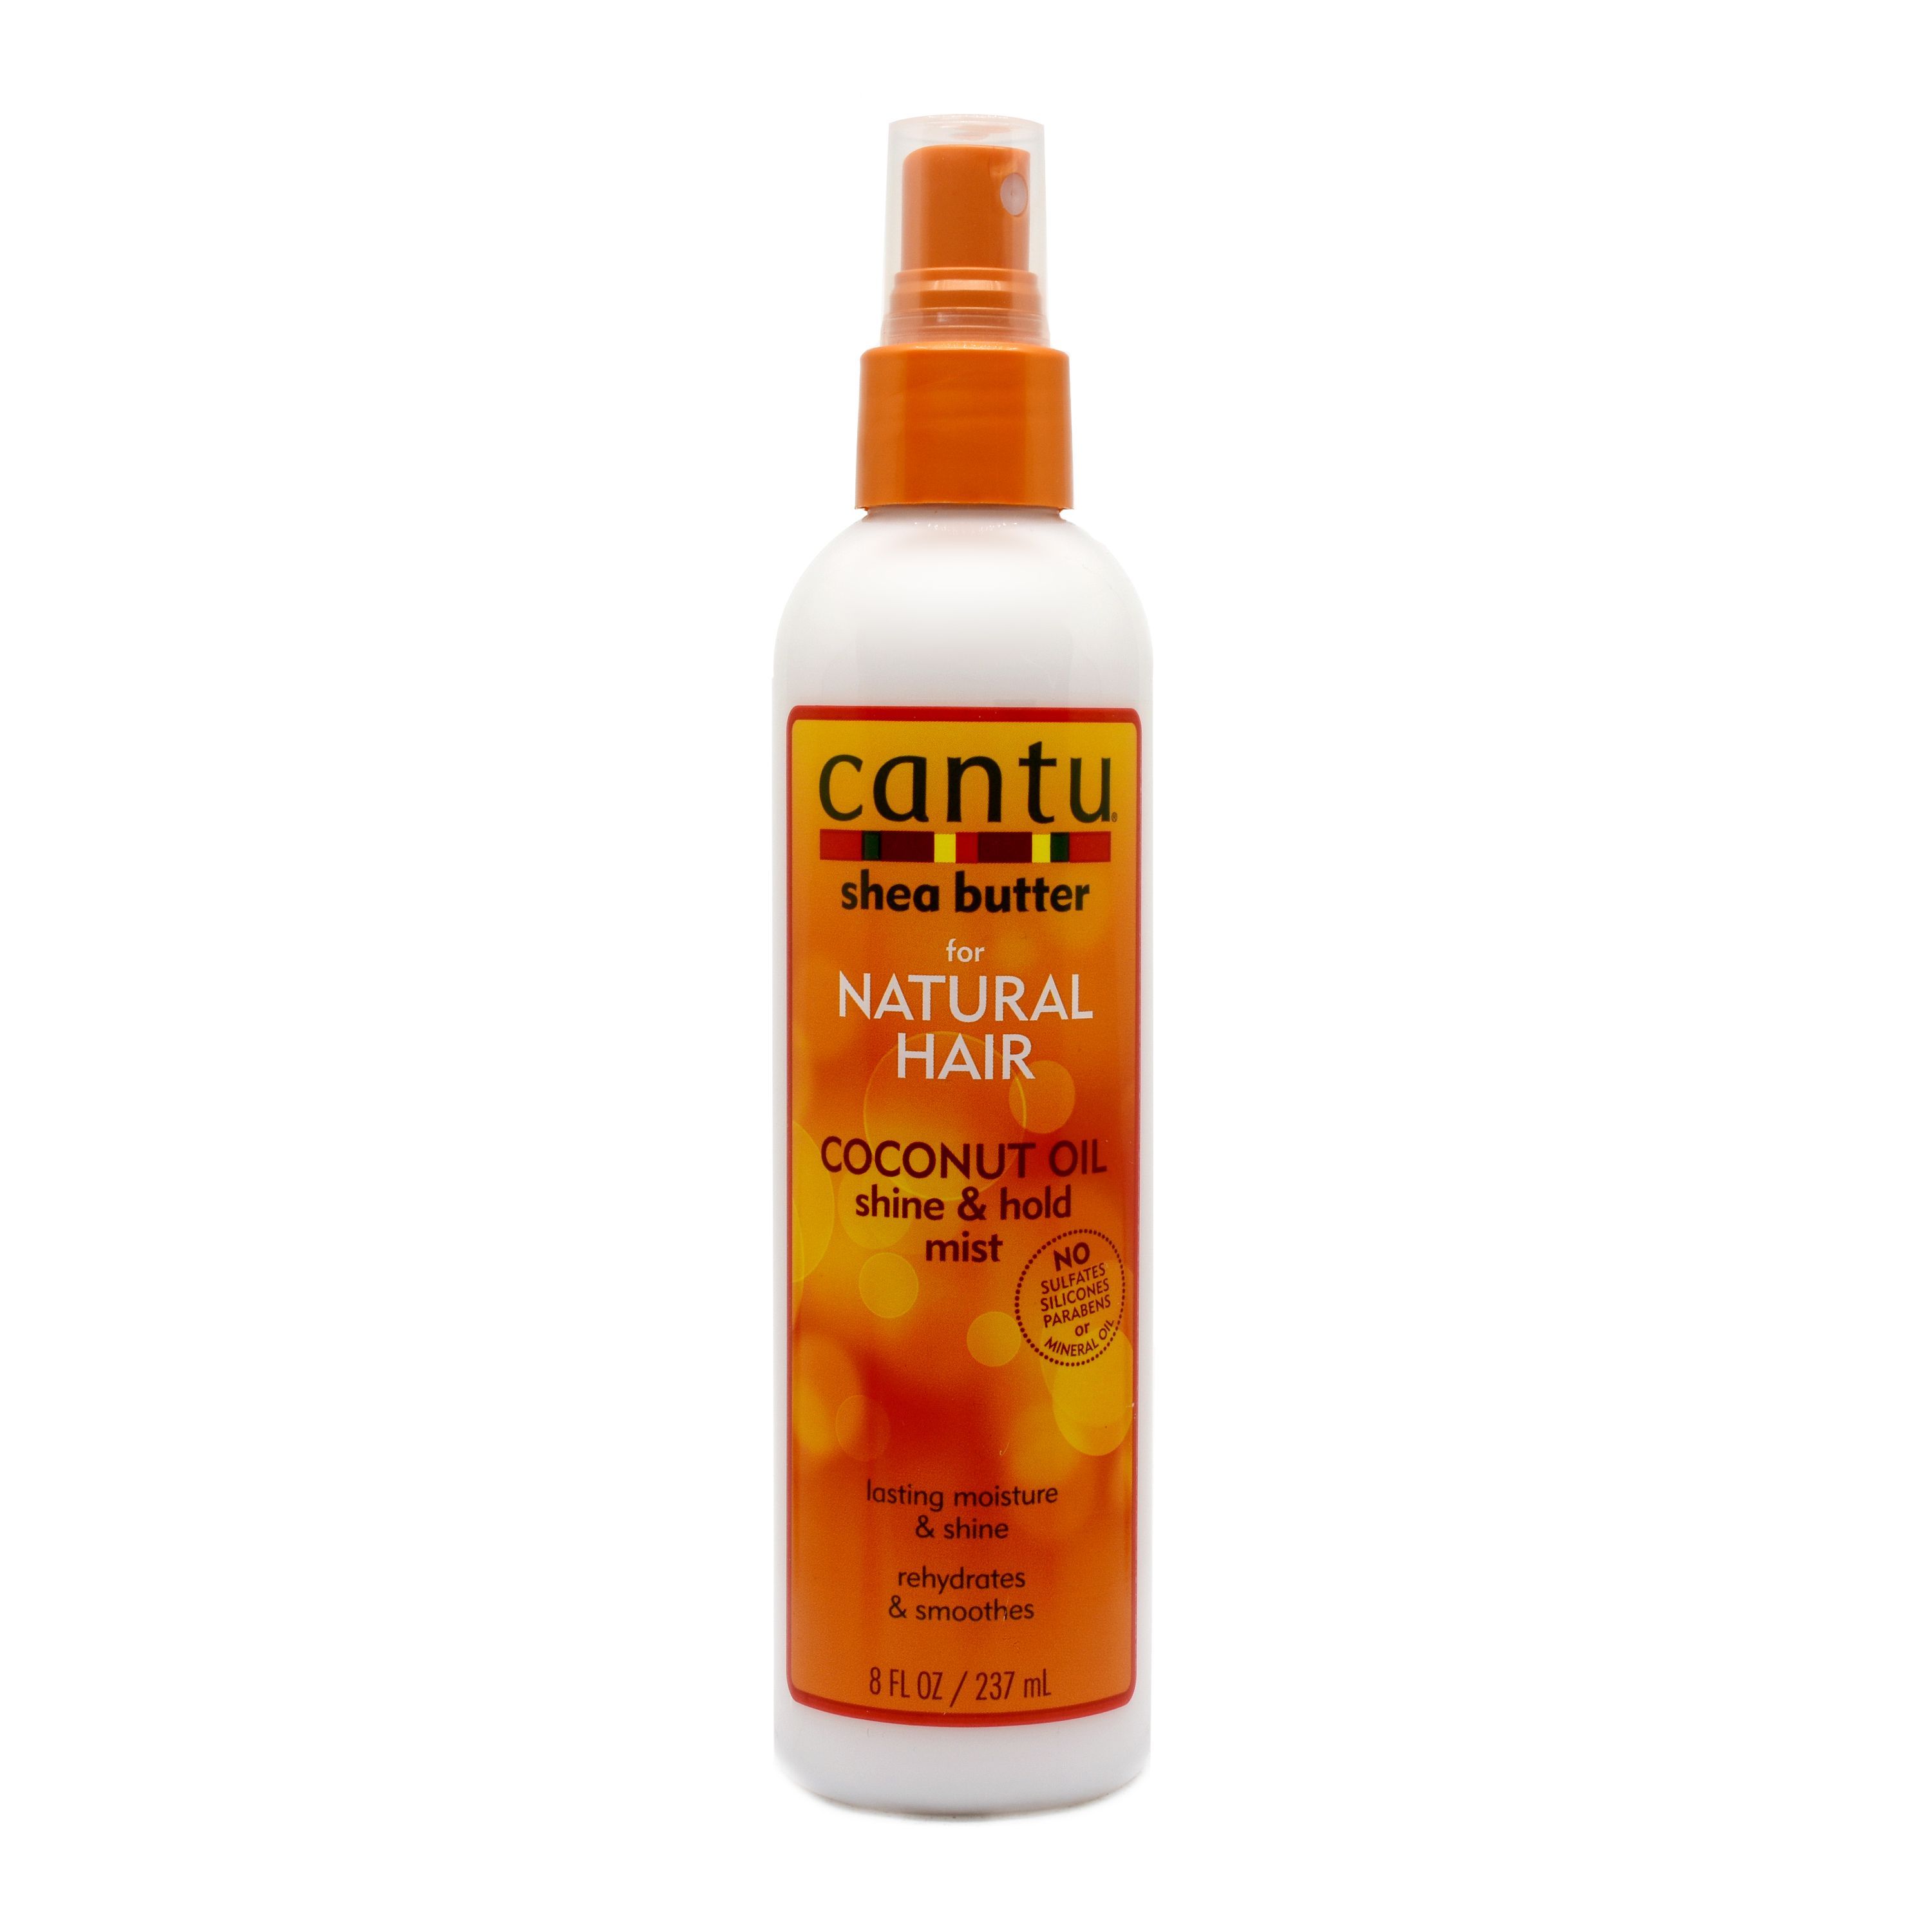 Cantu Shea Butter Coconut Oil Shine & Hold Mist For Natural Hair - 237ml